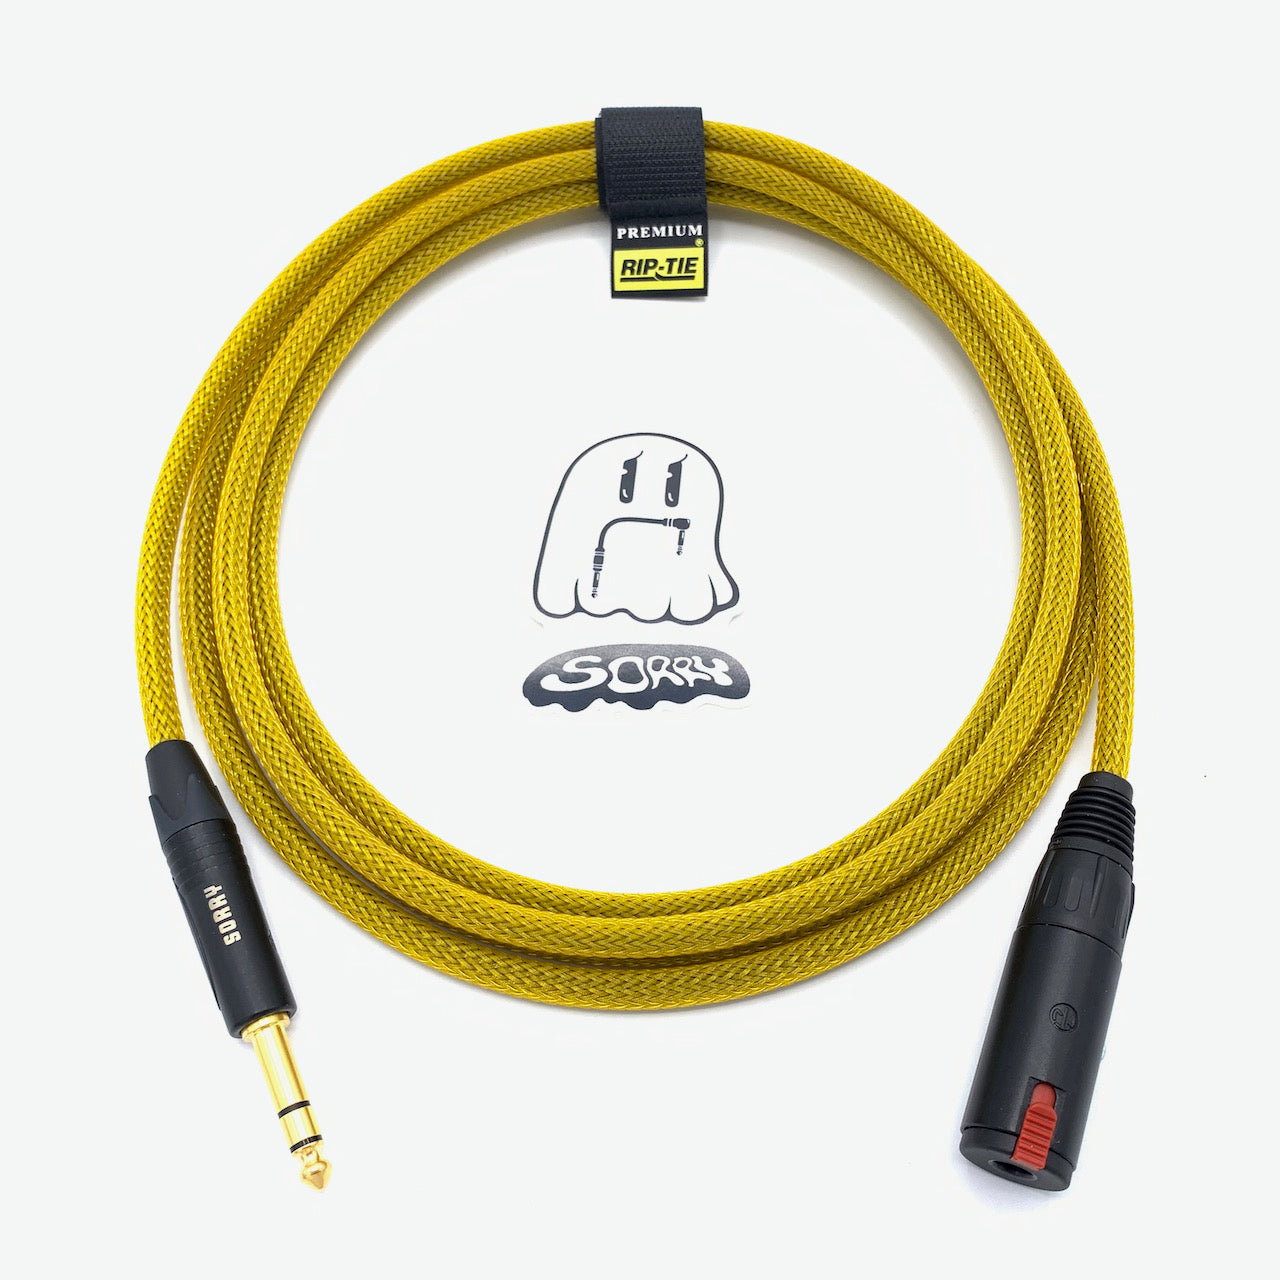 SORRY Locking Headphone Extension Cable - Yellow Gold